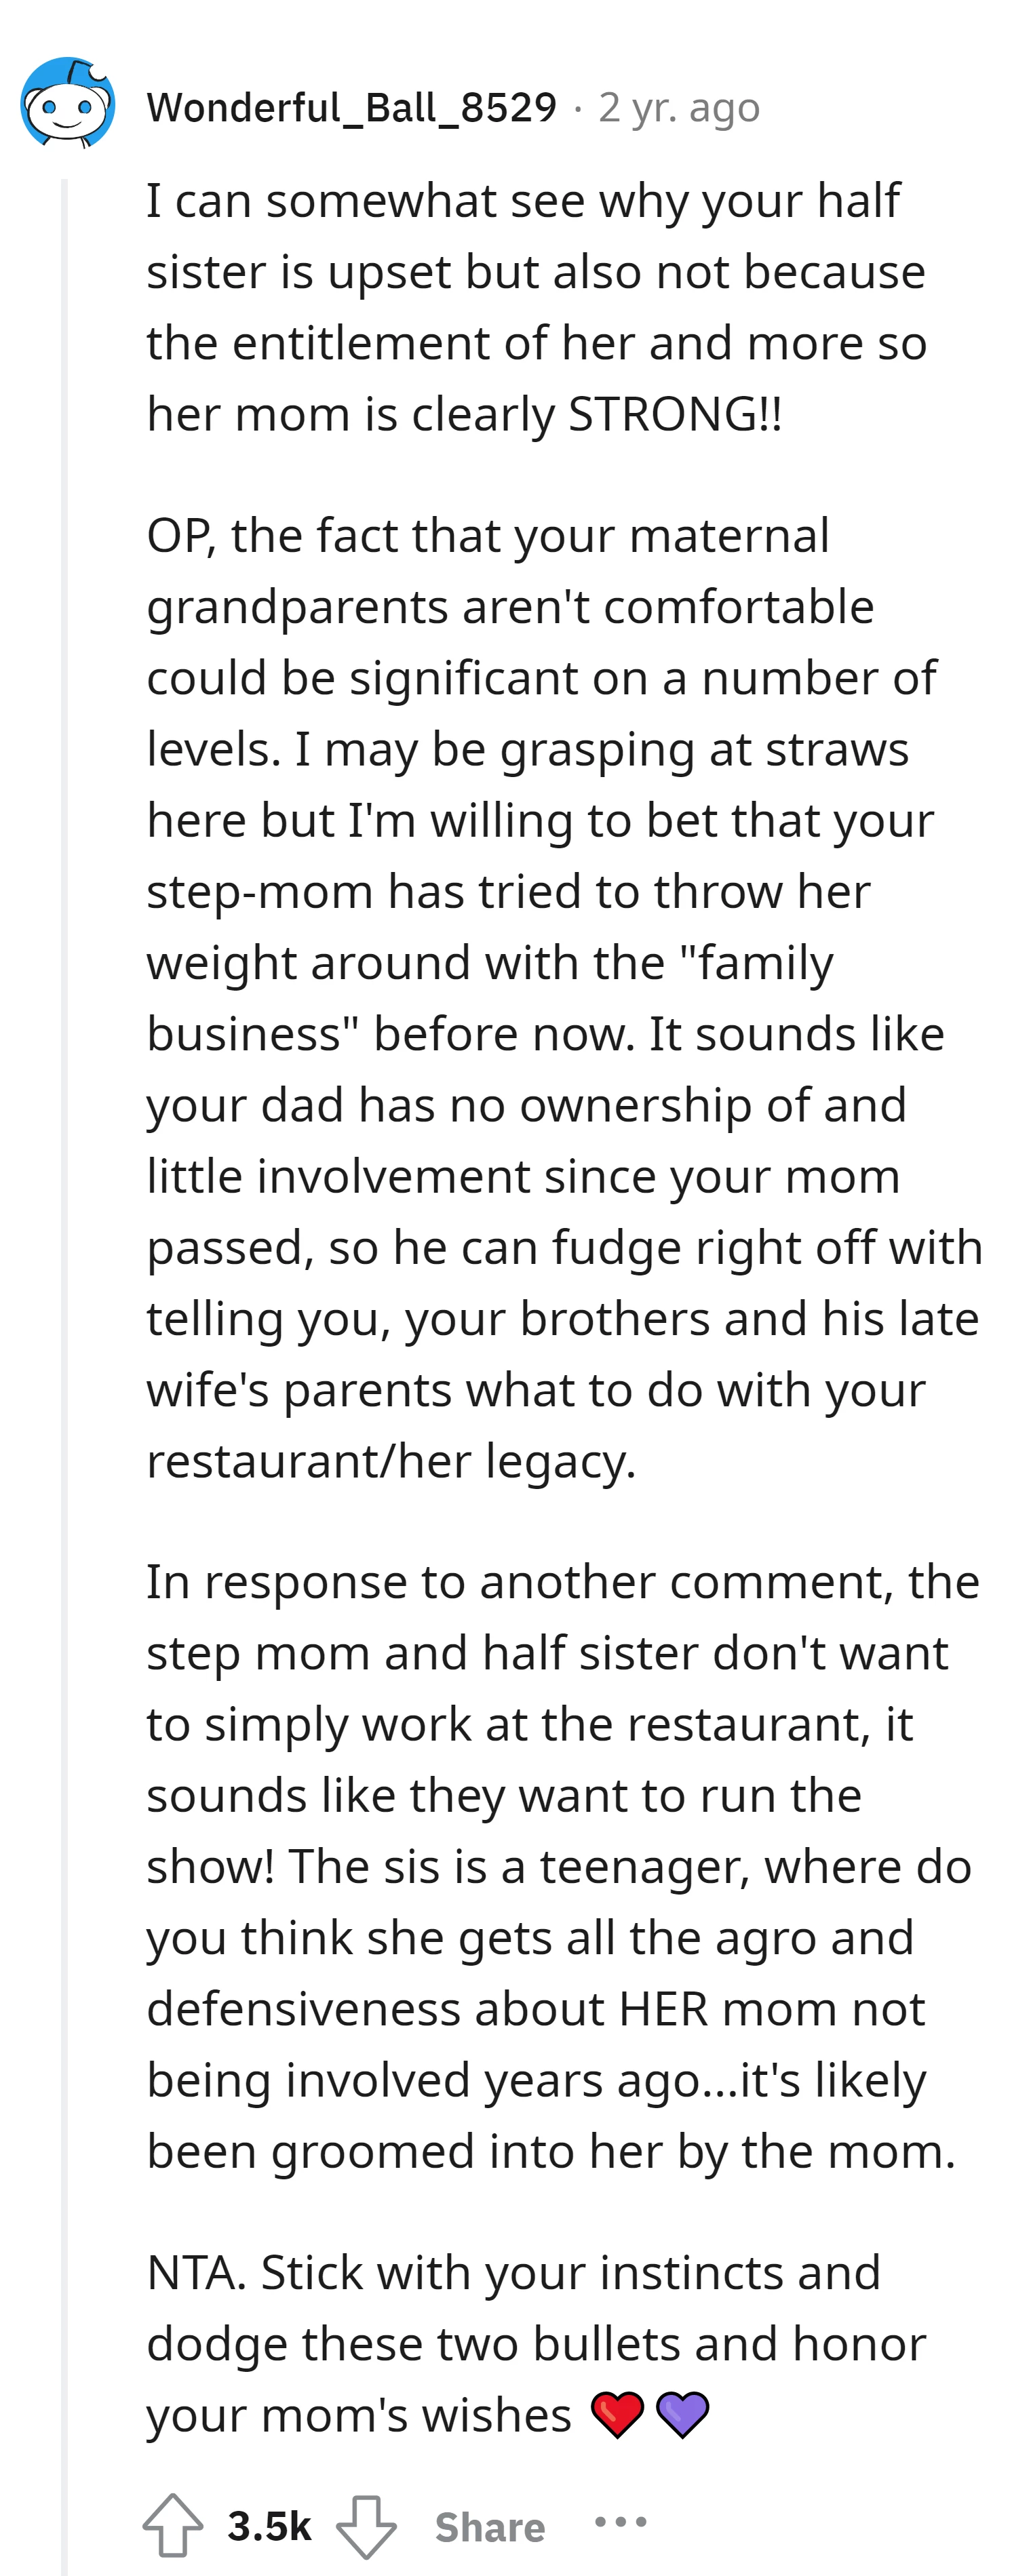 Commenter supports the OP's decision to prioritize their mom's legacy and honor her wishes